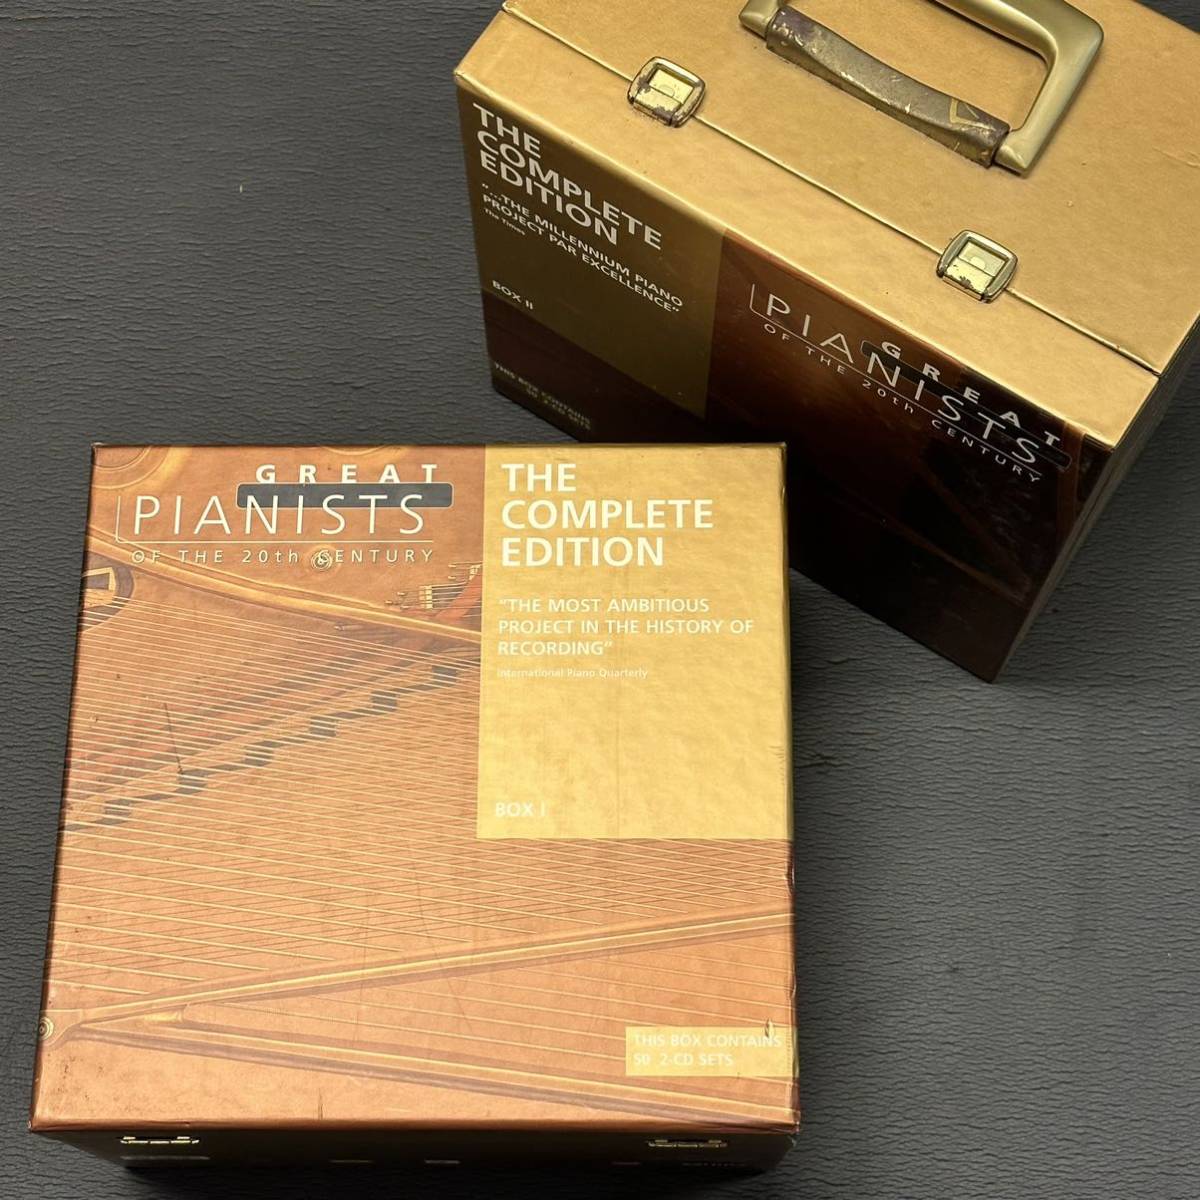 GREAT PIANISTS OF THE 20 th CENTURY - The Complete Edition Box1, Box2 200CD クラシック ピアノの画像2